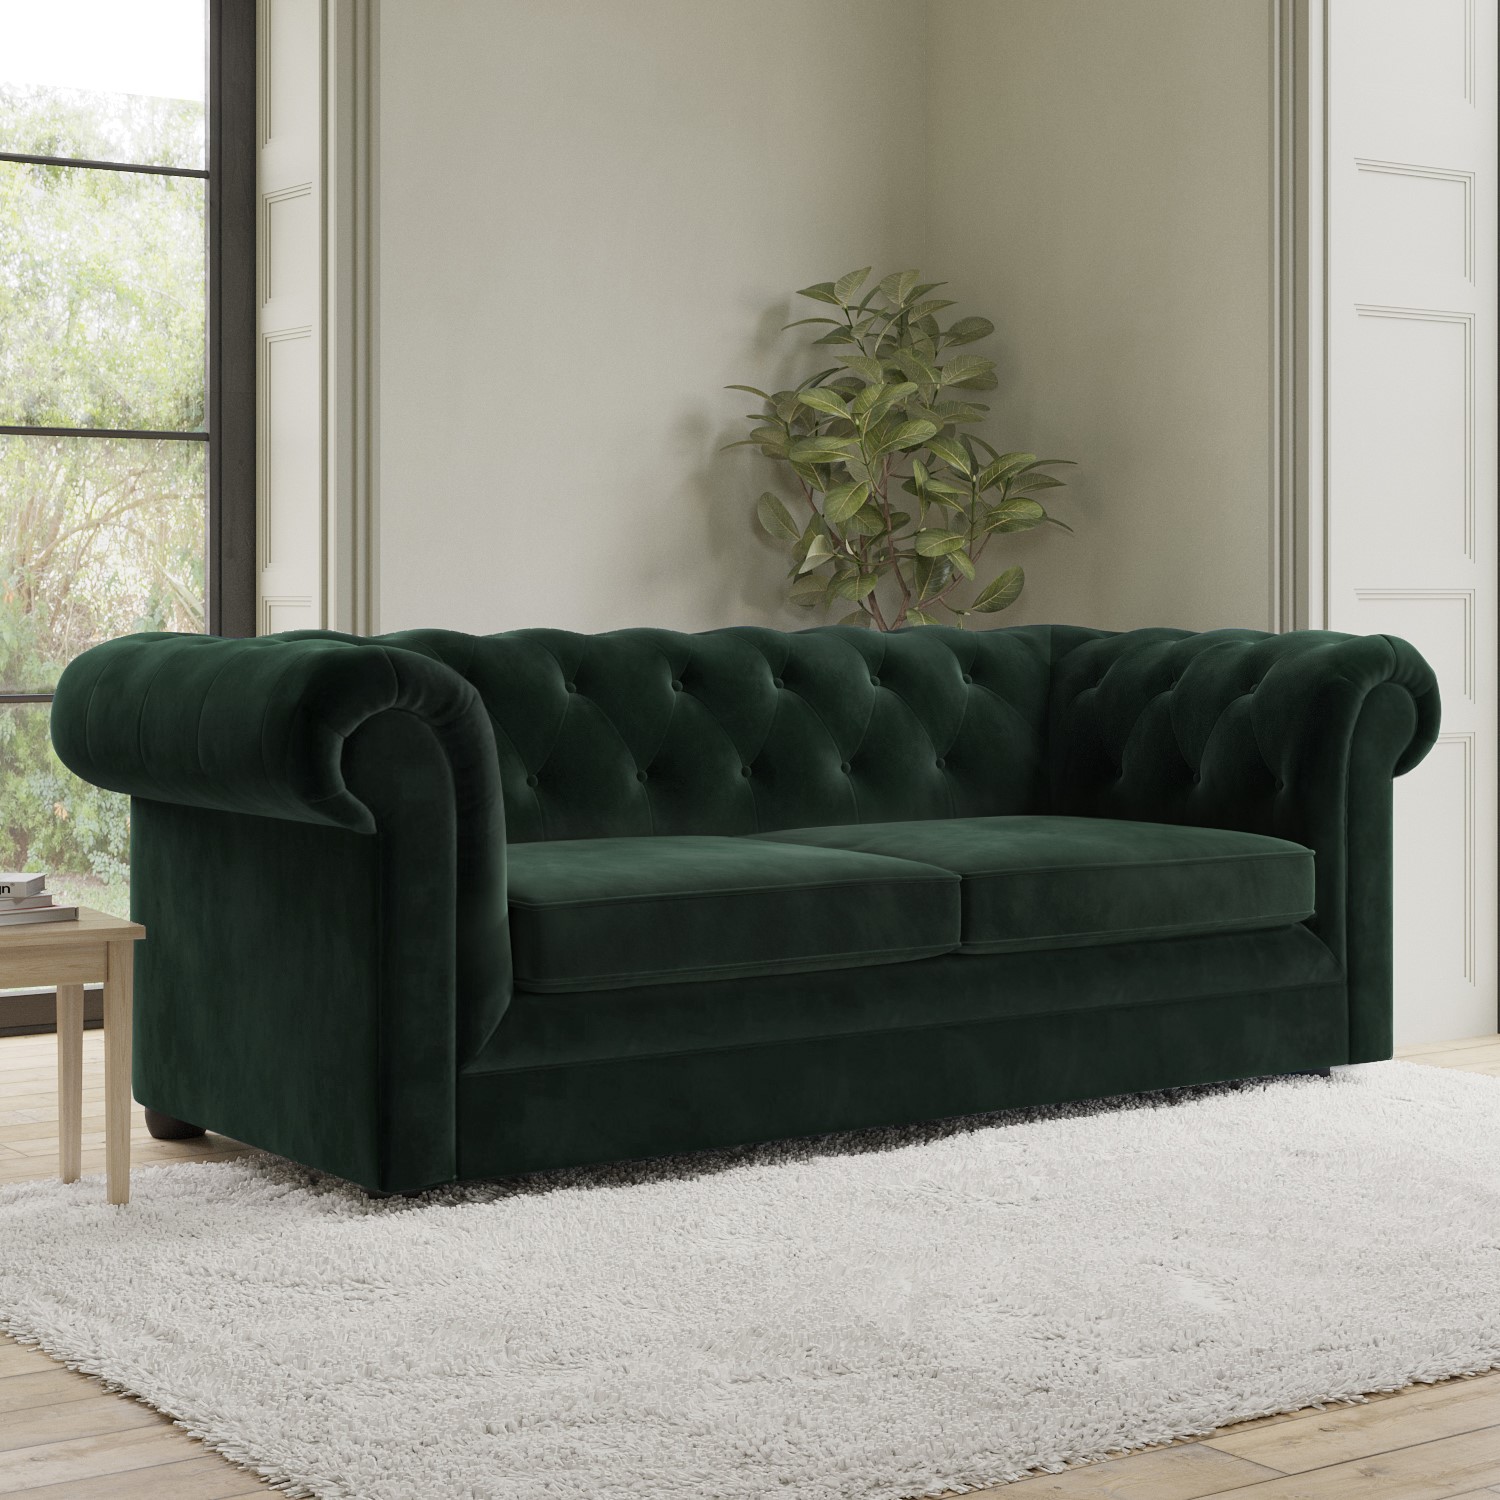 Photo of Green velvet chesterfield pull out sofa bed - seats 3 - bronte